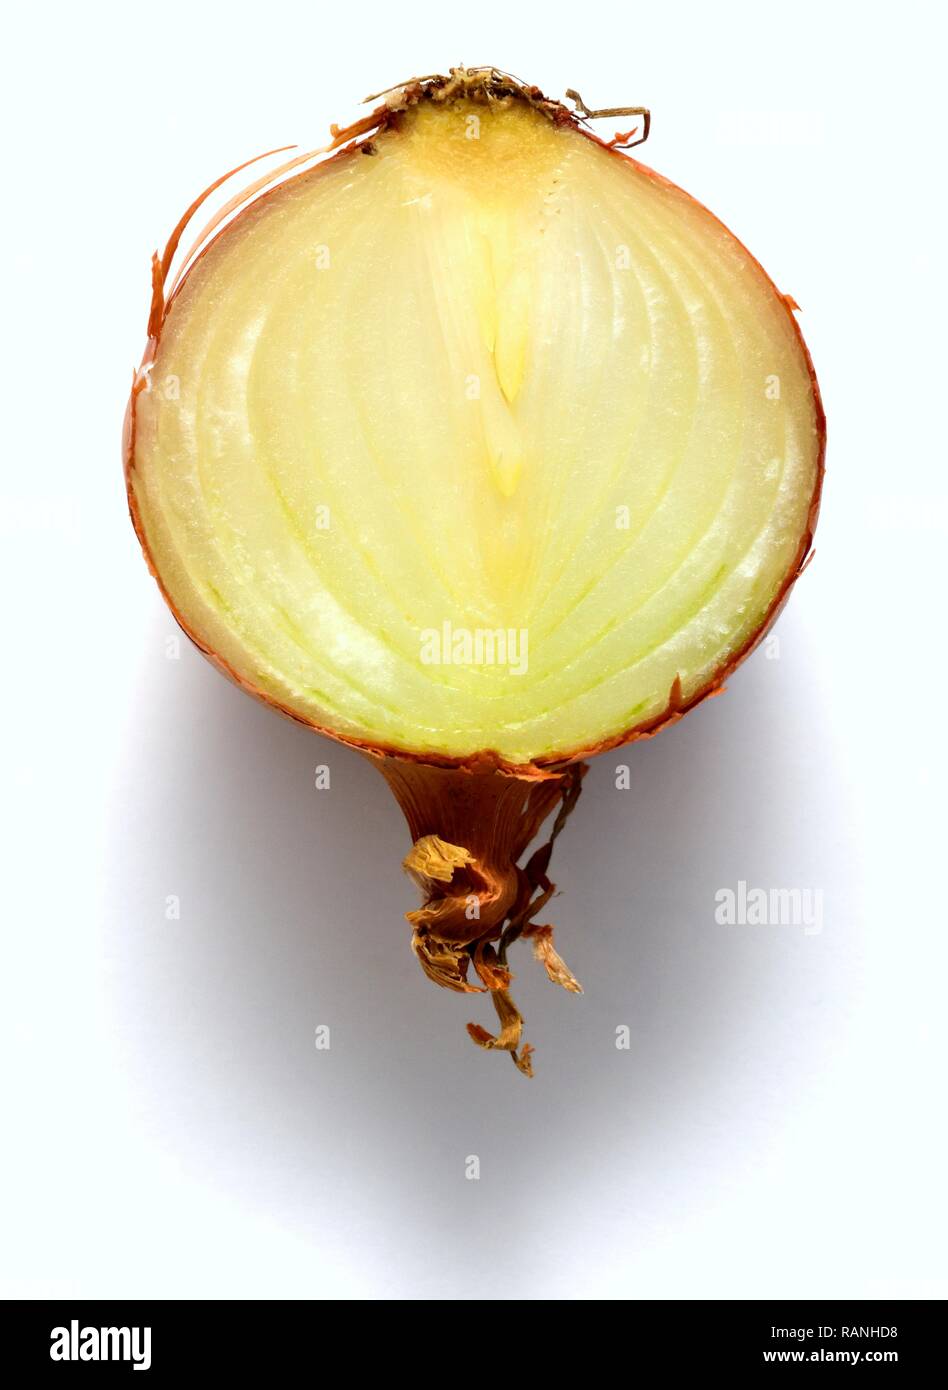 Cooking onion cut in half against a white background Stock Photo